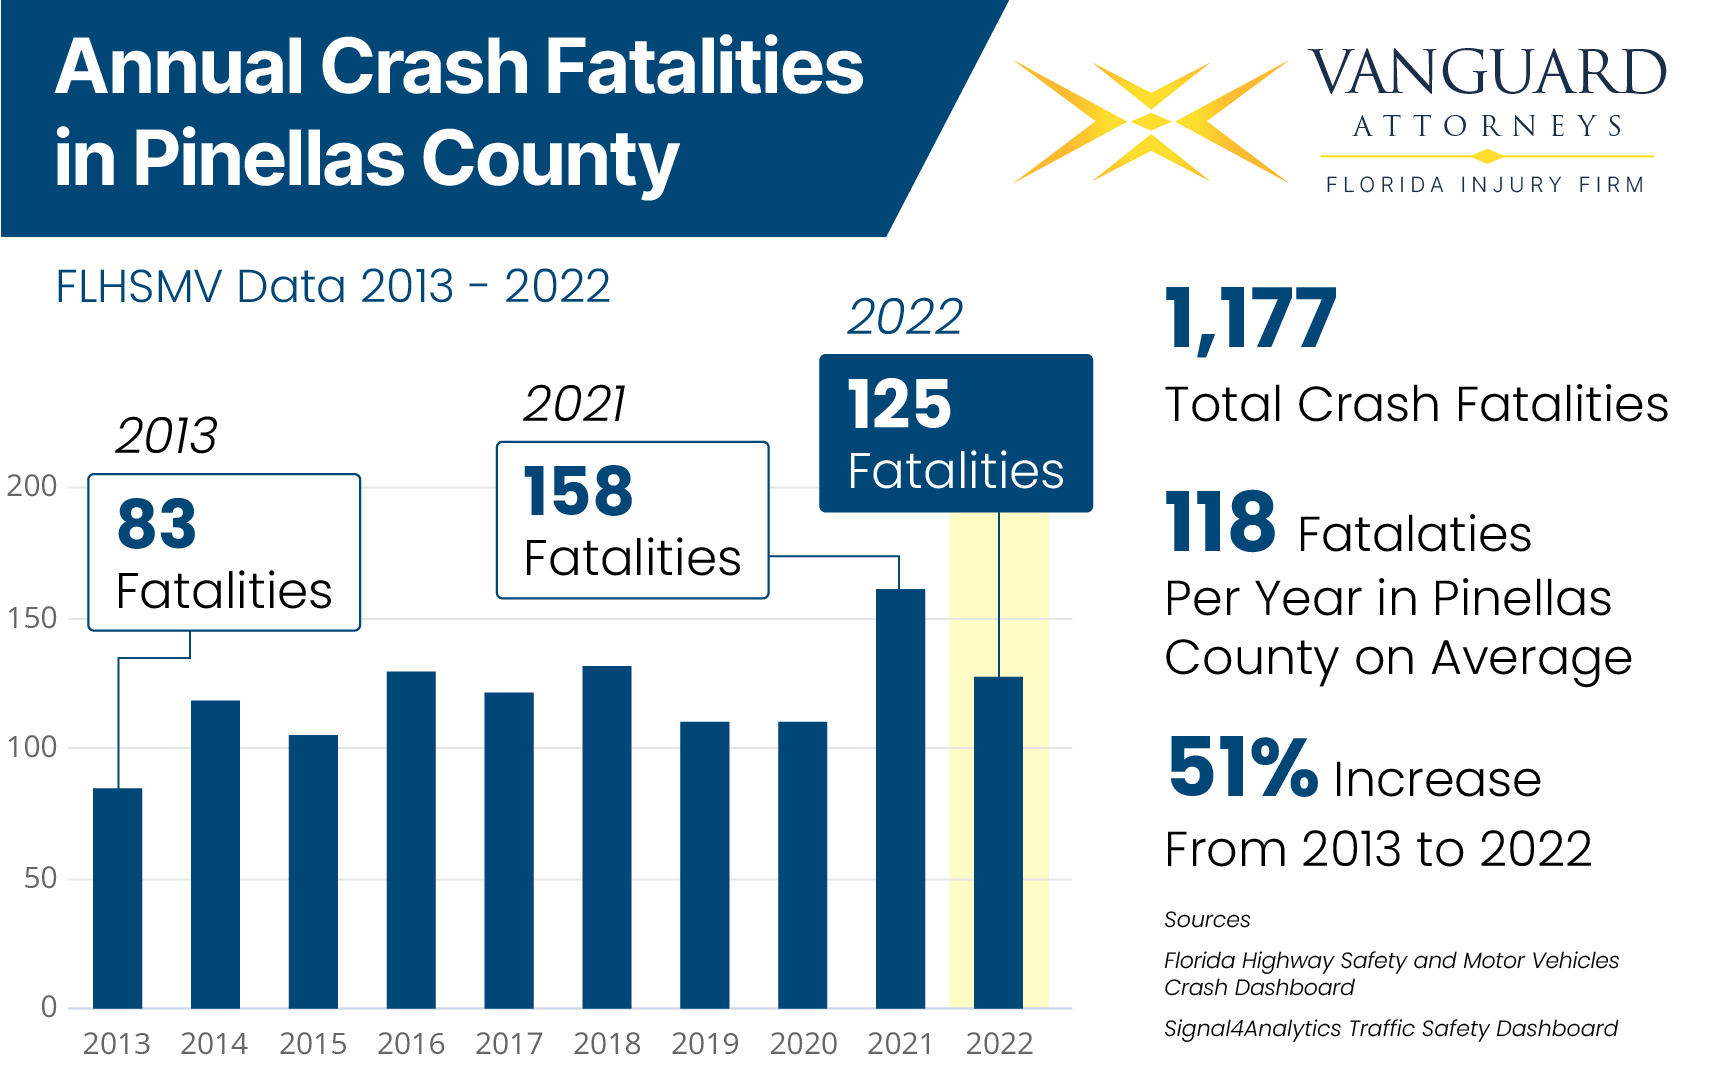 Bar chart of annual crash fatalities in Pinellas County from 2013-2022. 118 crash fatalities occur in Pinellas County on average each year.